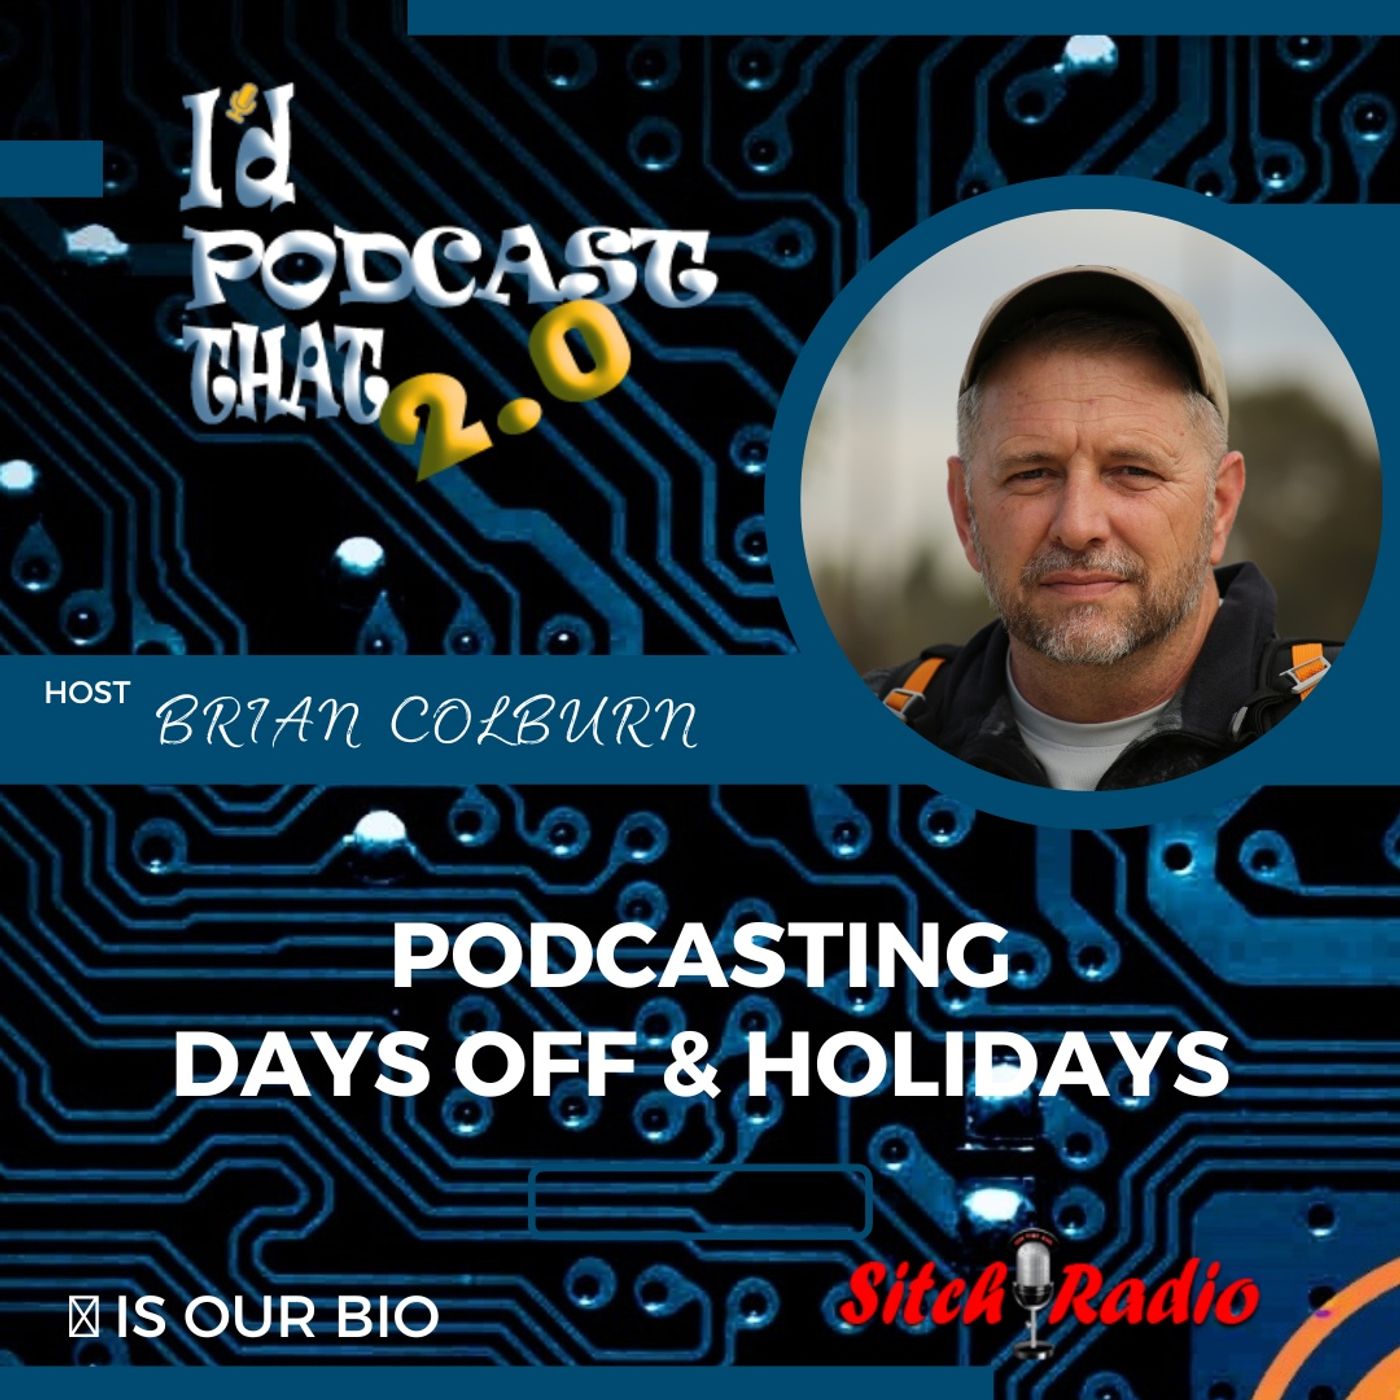 Is it Okay to take a day off as a podcaster?